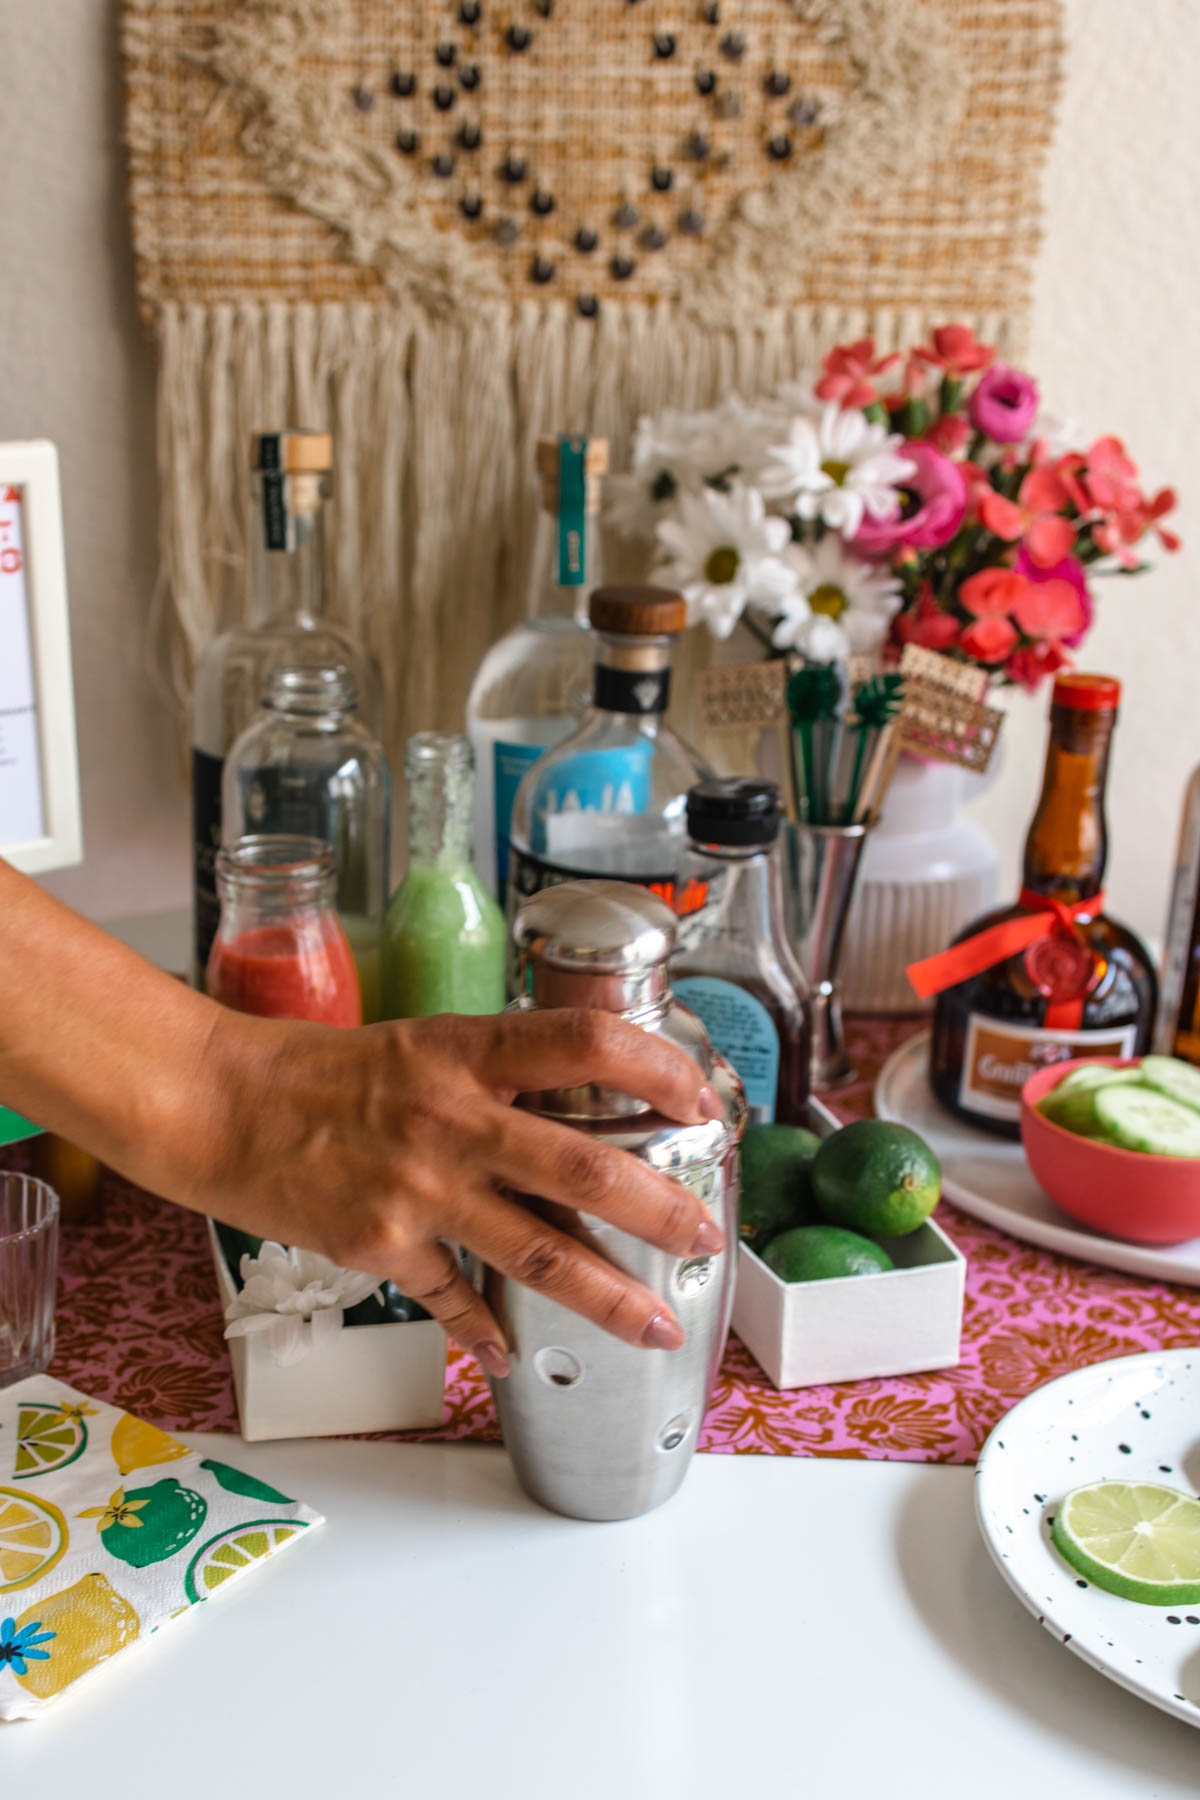 A person holding a cocktail shaker in front of margarita ingredients and supplies on a table.